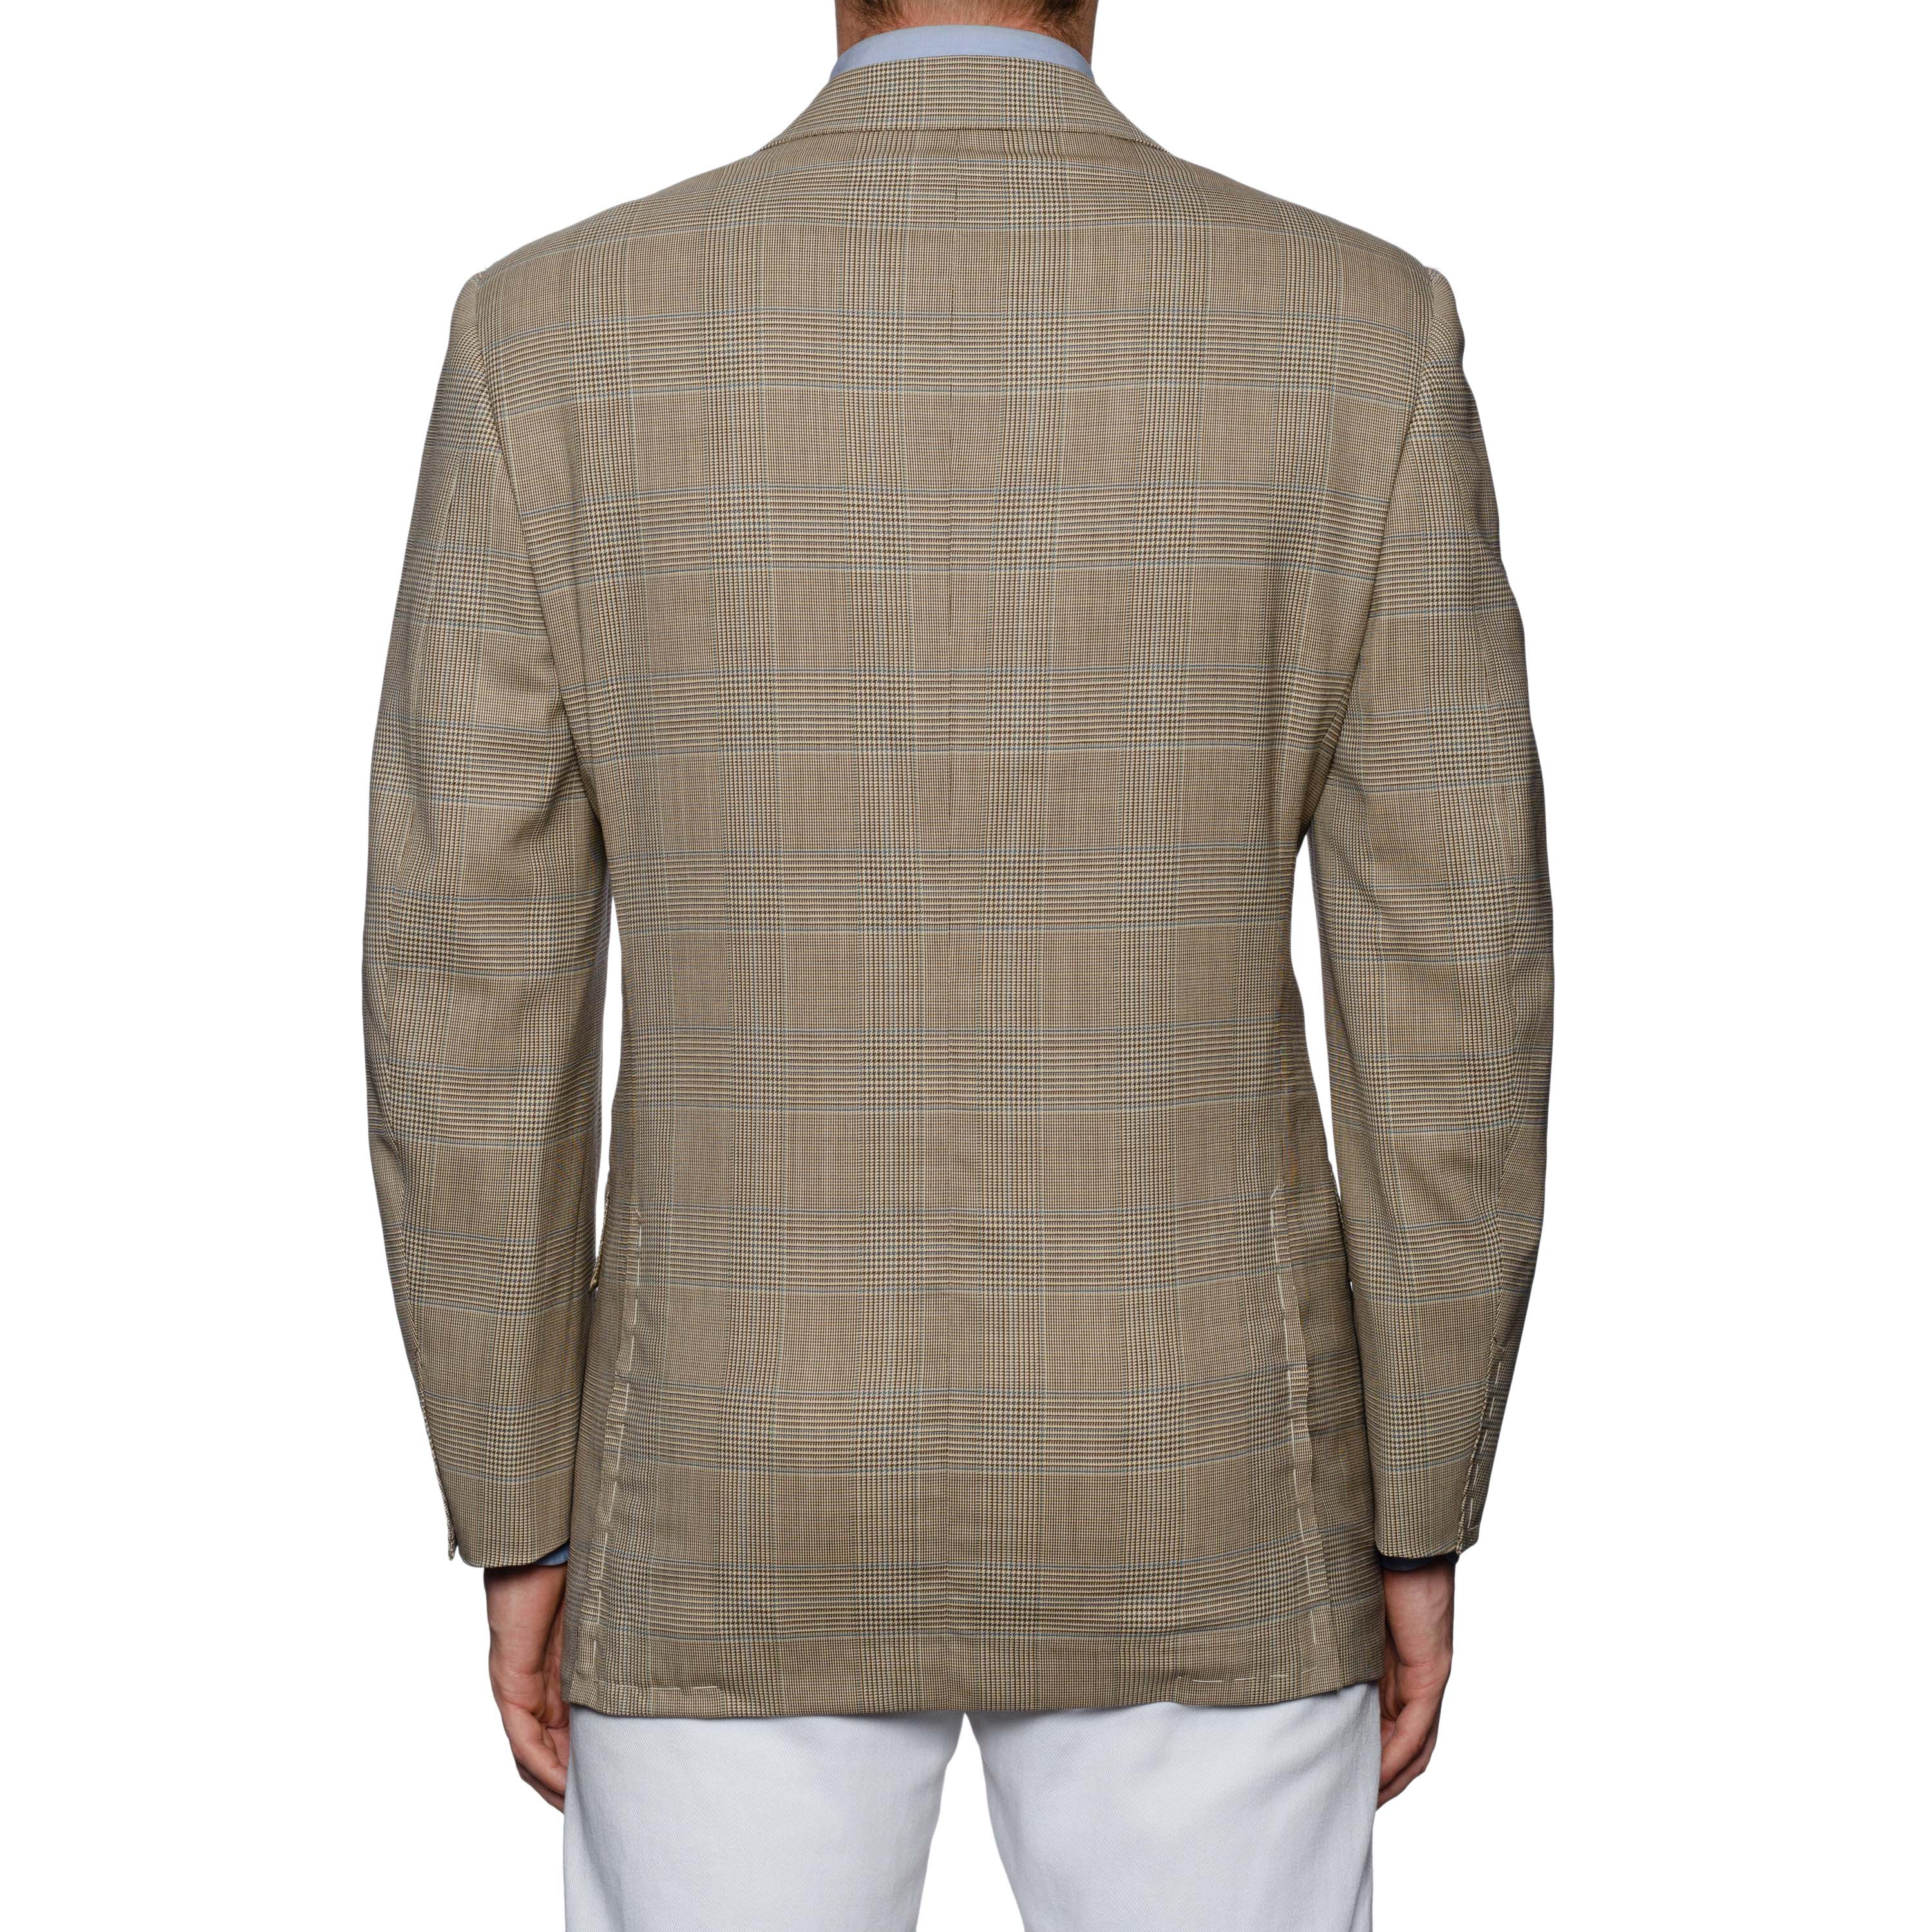 CASTANGIA 1850 Beige Prince of Wales Wool Super 100's Sport Coat Jacket NEW CASTANGIA